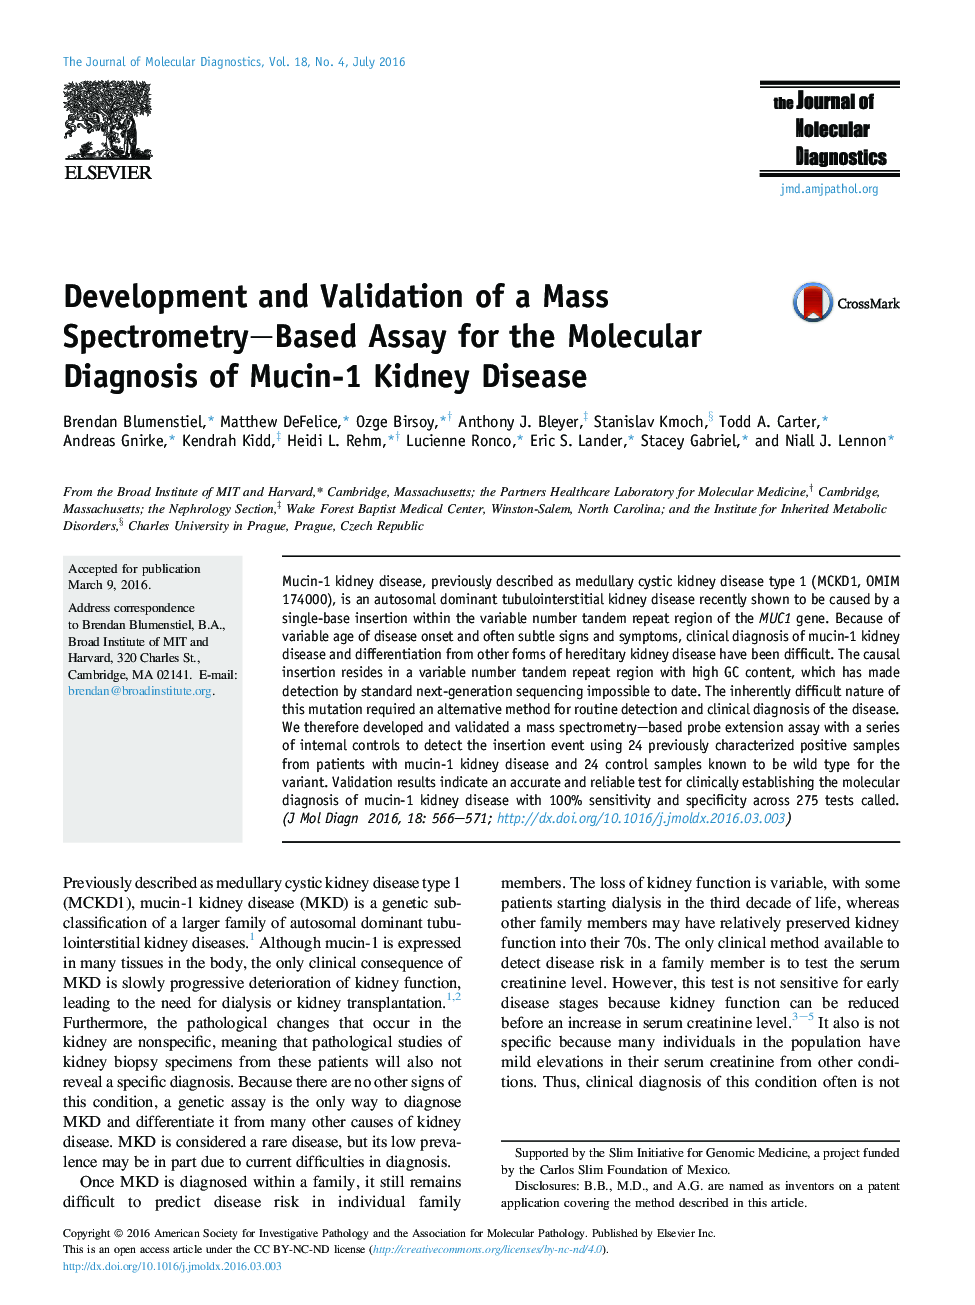 Regular articleDevelopment and Validation of a Mass Spectrometry-Based Assay for the Molecular Diagnosis of Mucin-1 Kidney Disease